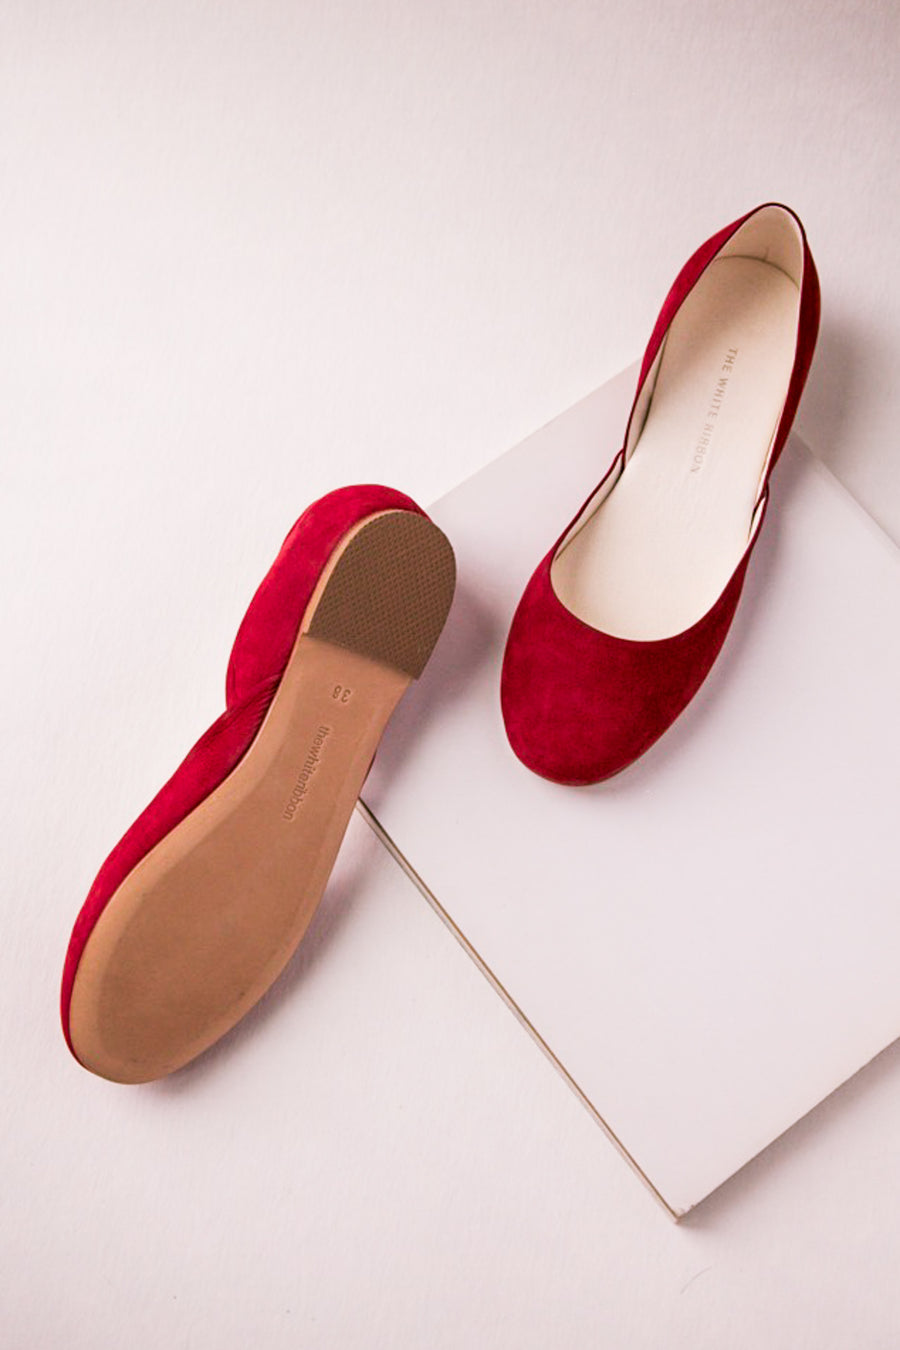 THEA BALLET FLATS - RUBY RED NUBUCK